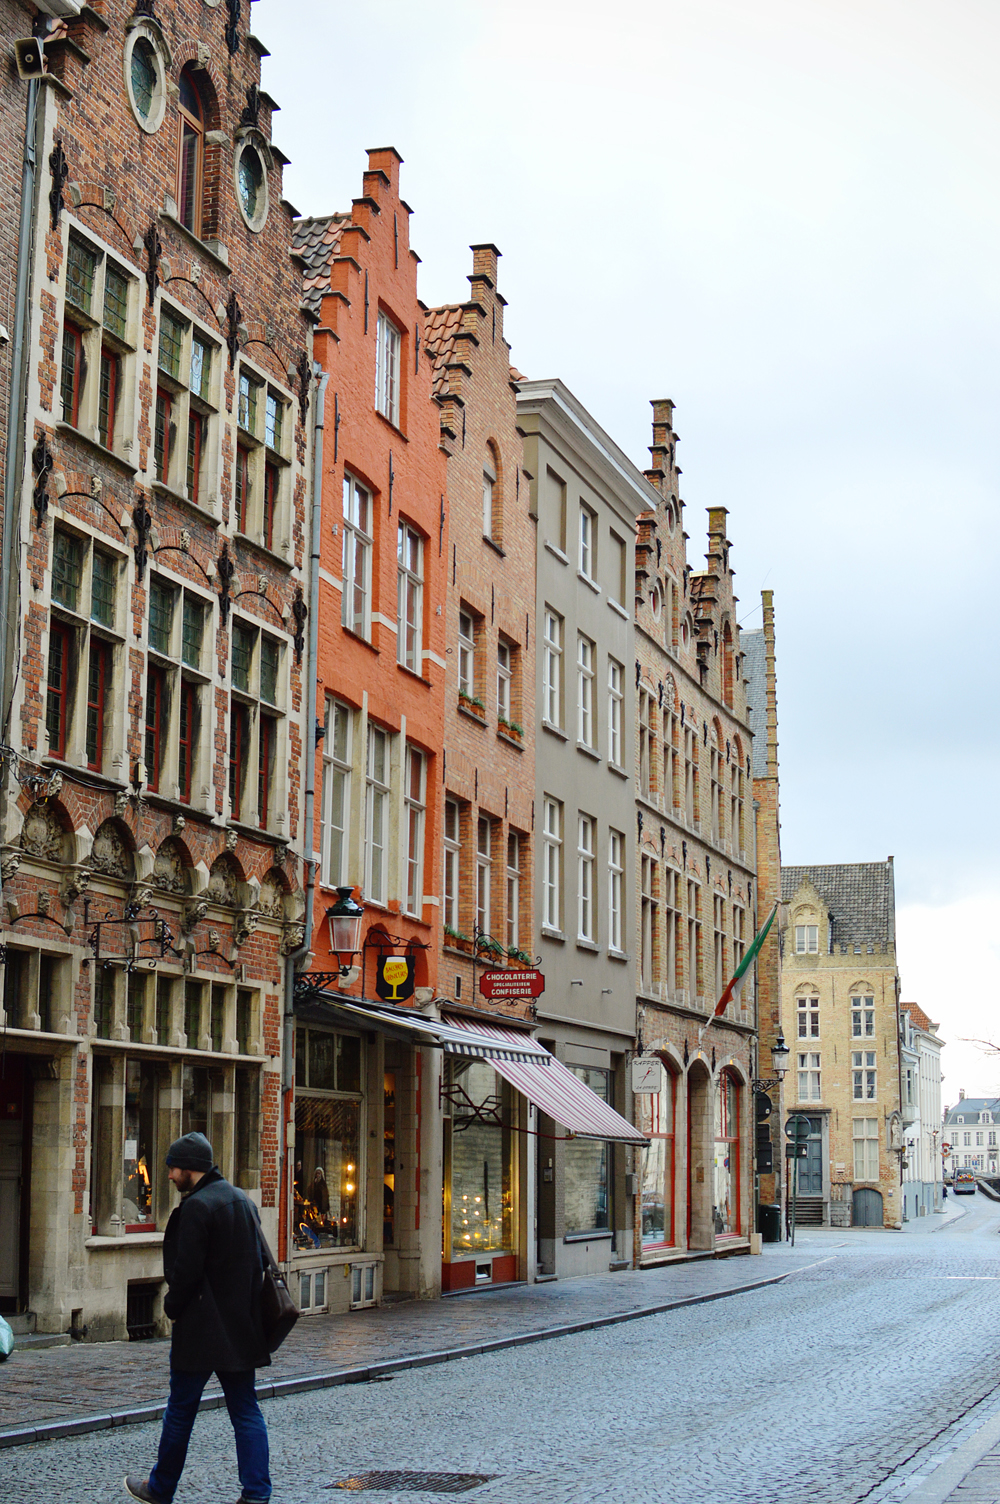 Long weekend in Bruges with bar and restaurant recommendations